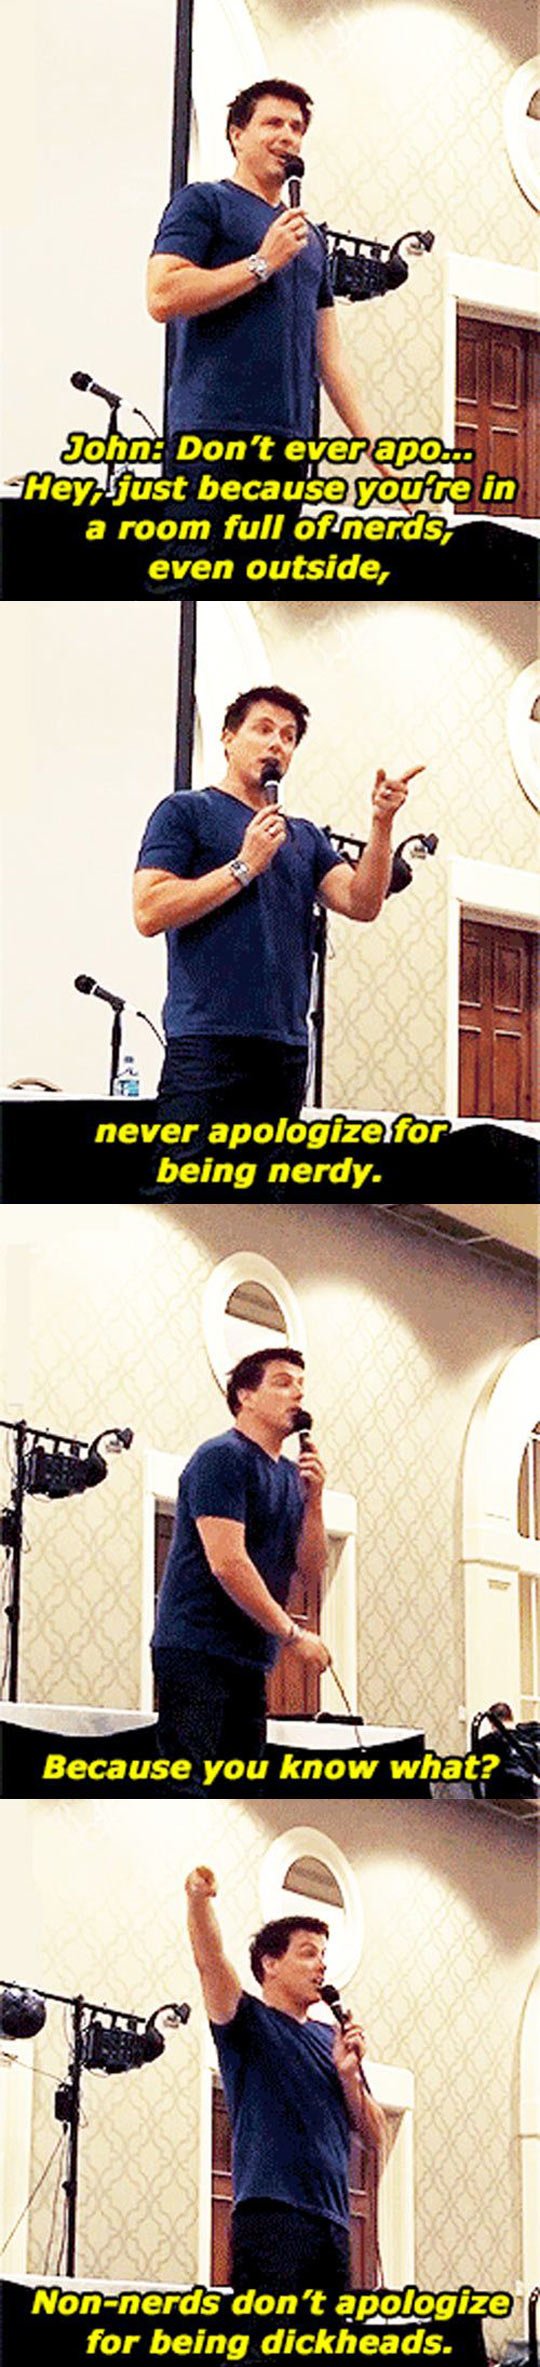 Don't apologize for being nerdy.